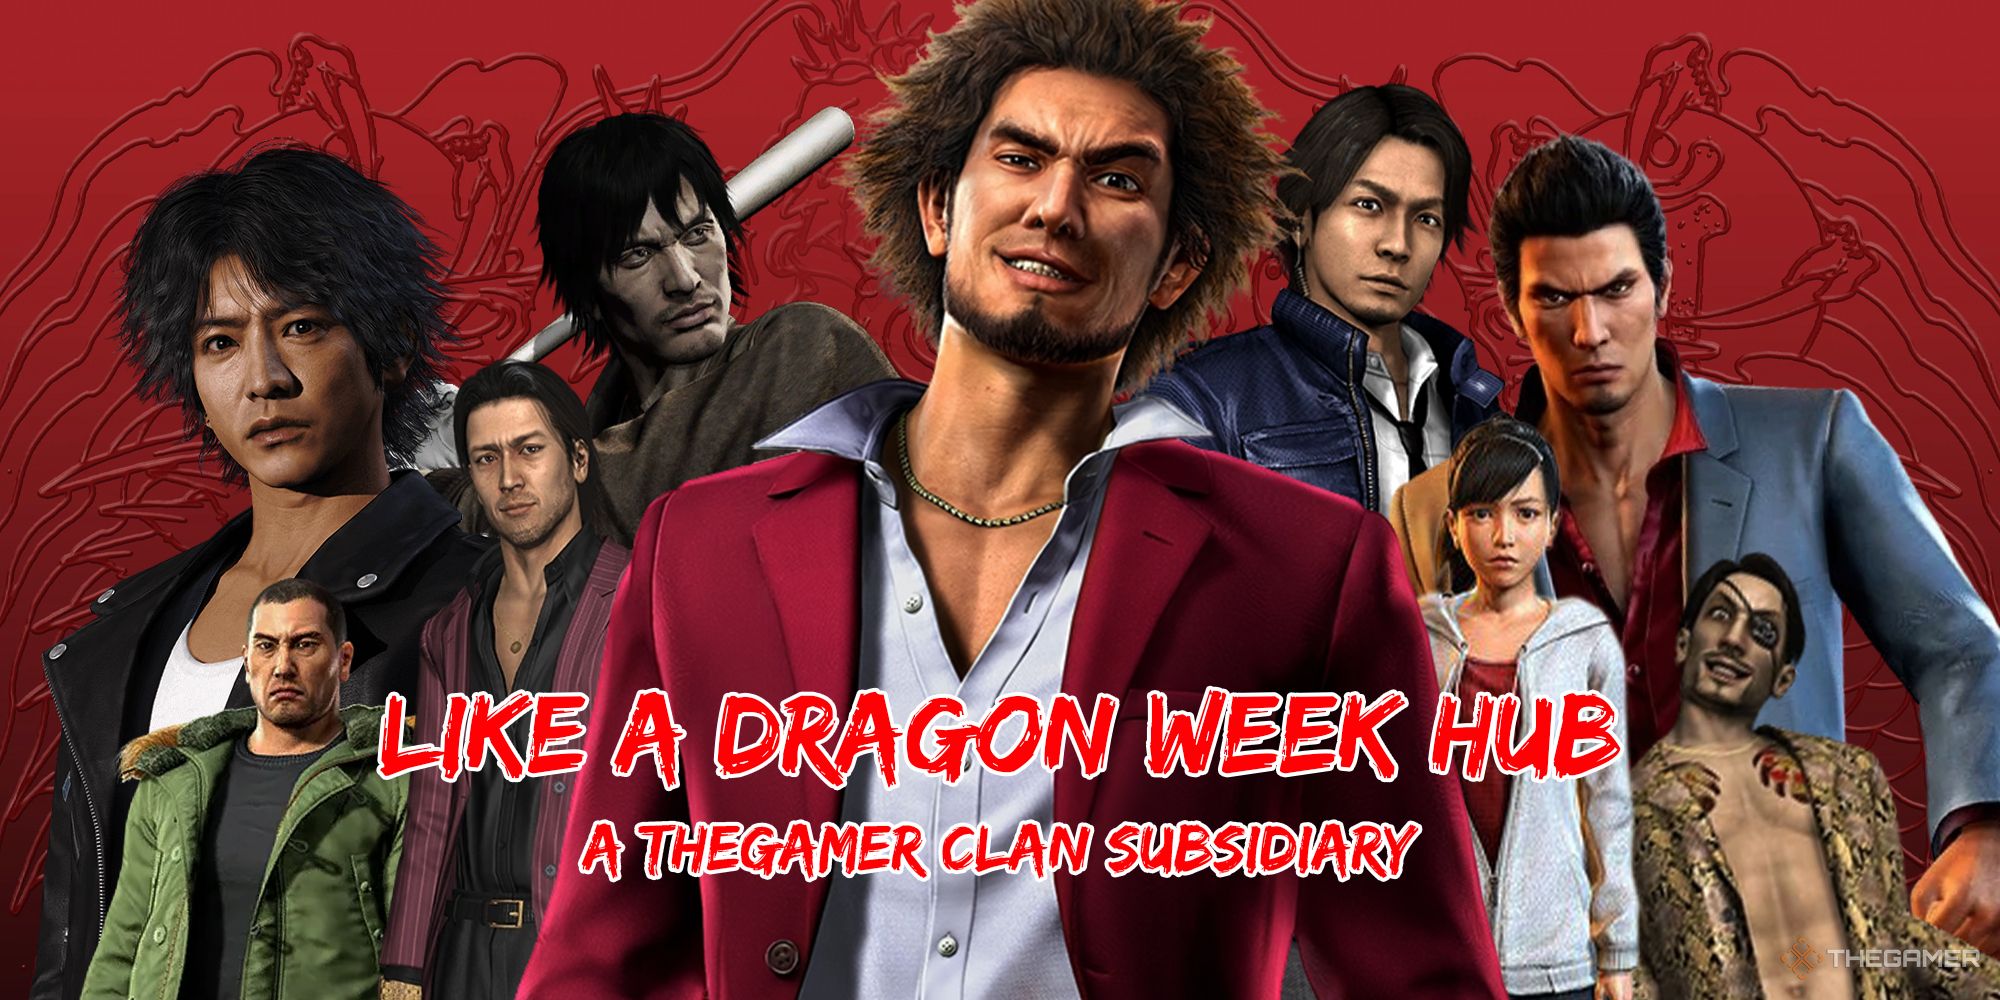 A collection of characters from the Yakuza/Like a Dragon series with the Like a Dragon week text overlaid above them.